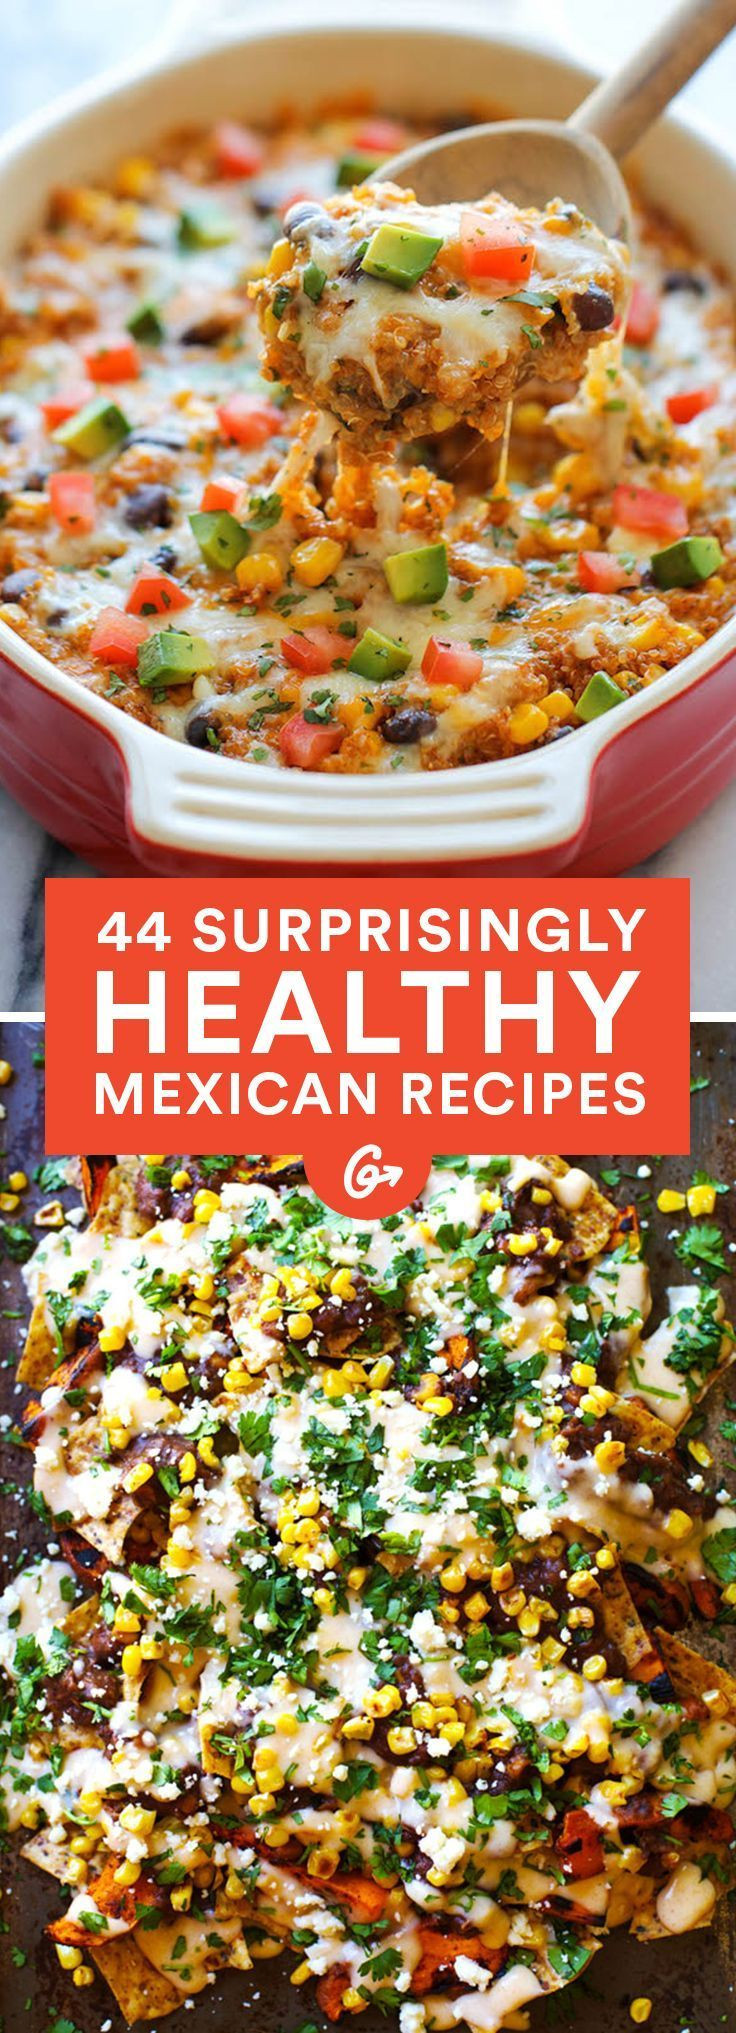 Mexican Food Ideas For Dinner
 44 Surprisingly Healthy Mexican Dinner Ideas and Recipes